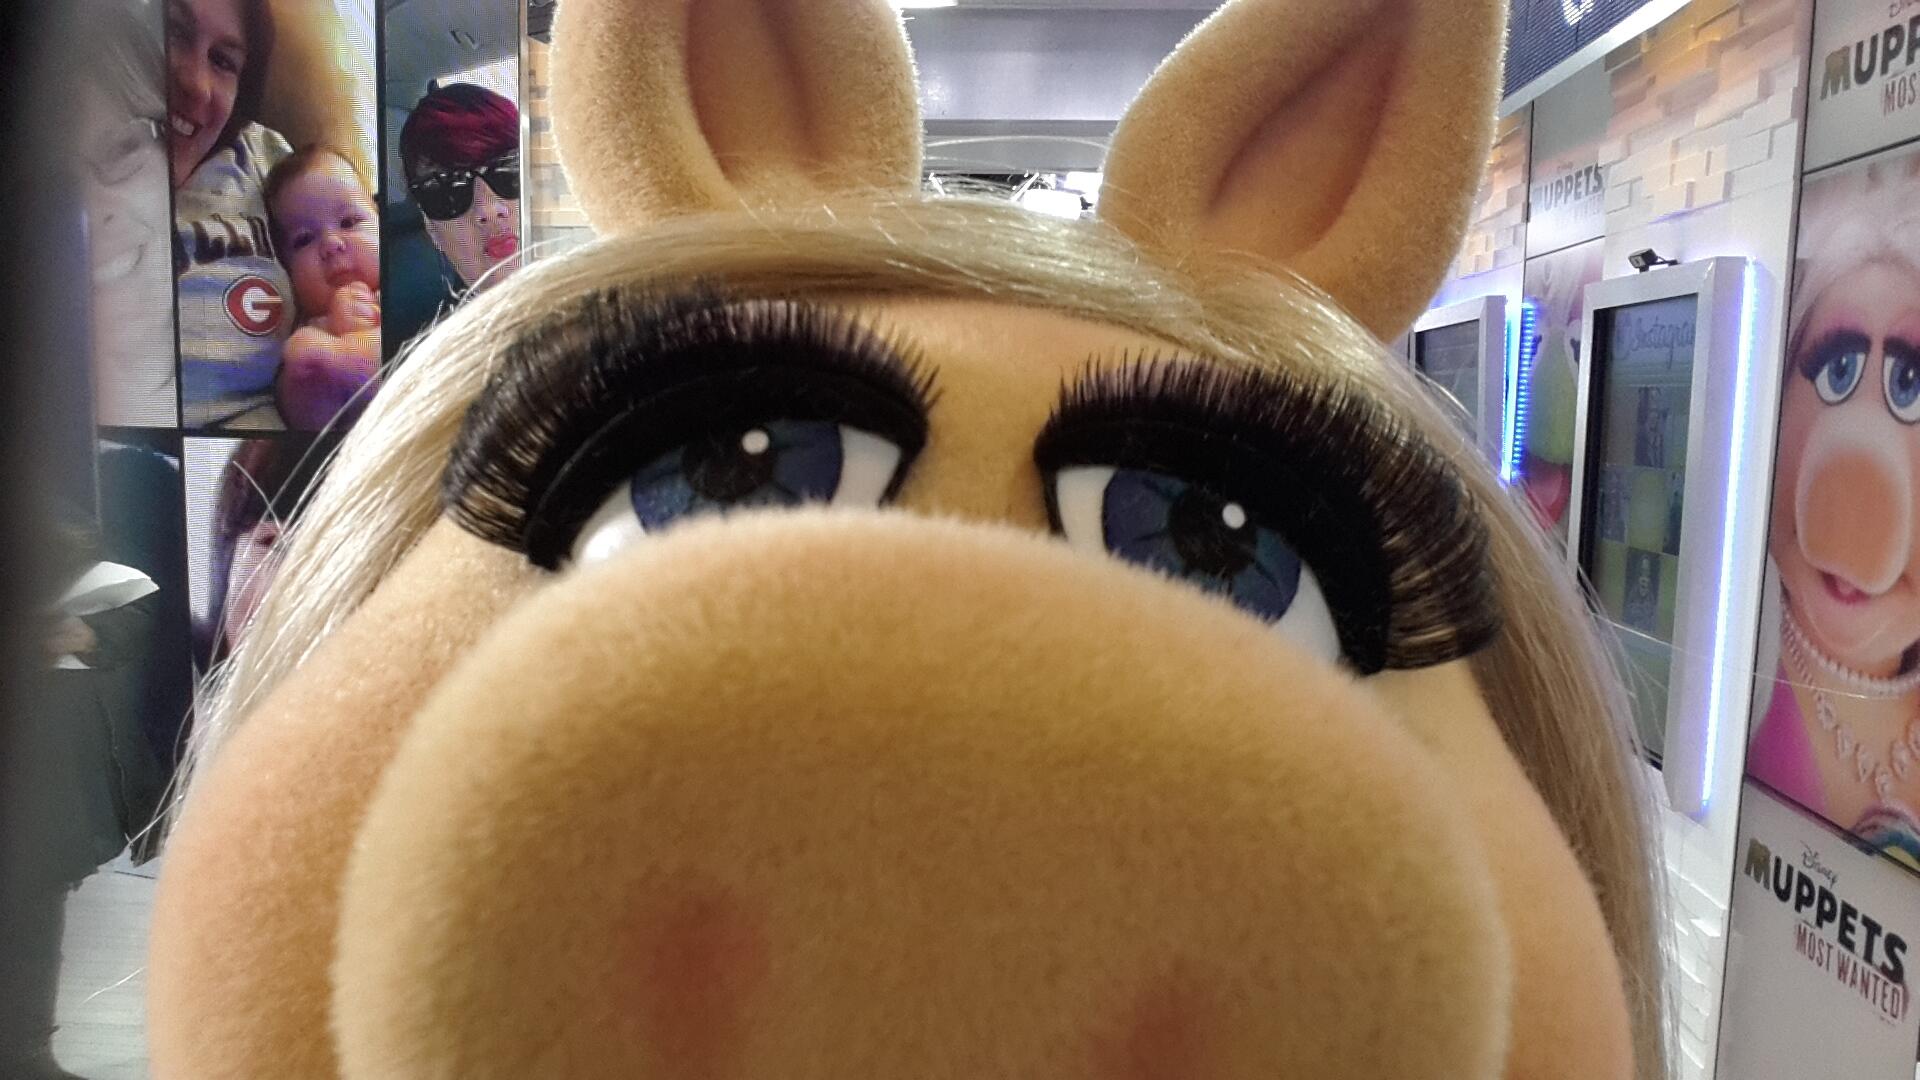 Happy National Selfie Day from Miss Piggy!, Smile! It's  #NationalSelfieDay! Miss Piggy has the perfect poses and the flashiest tips  to help you take the perfect selfie., By The Muppets